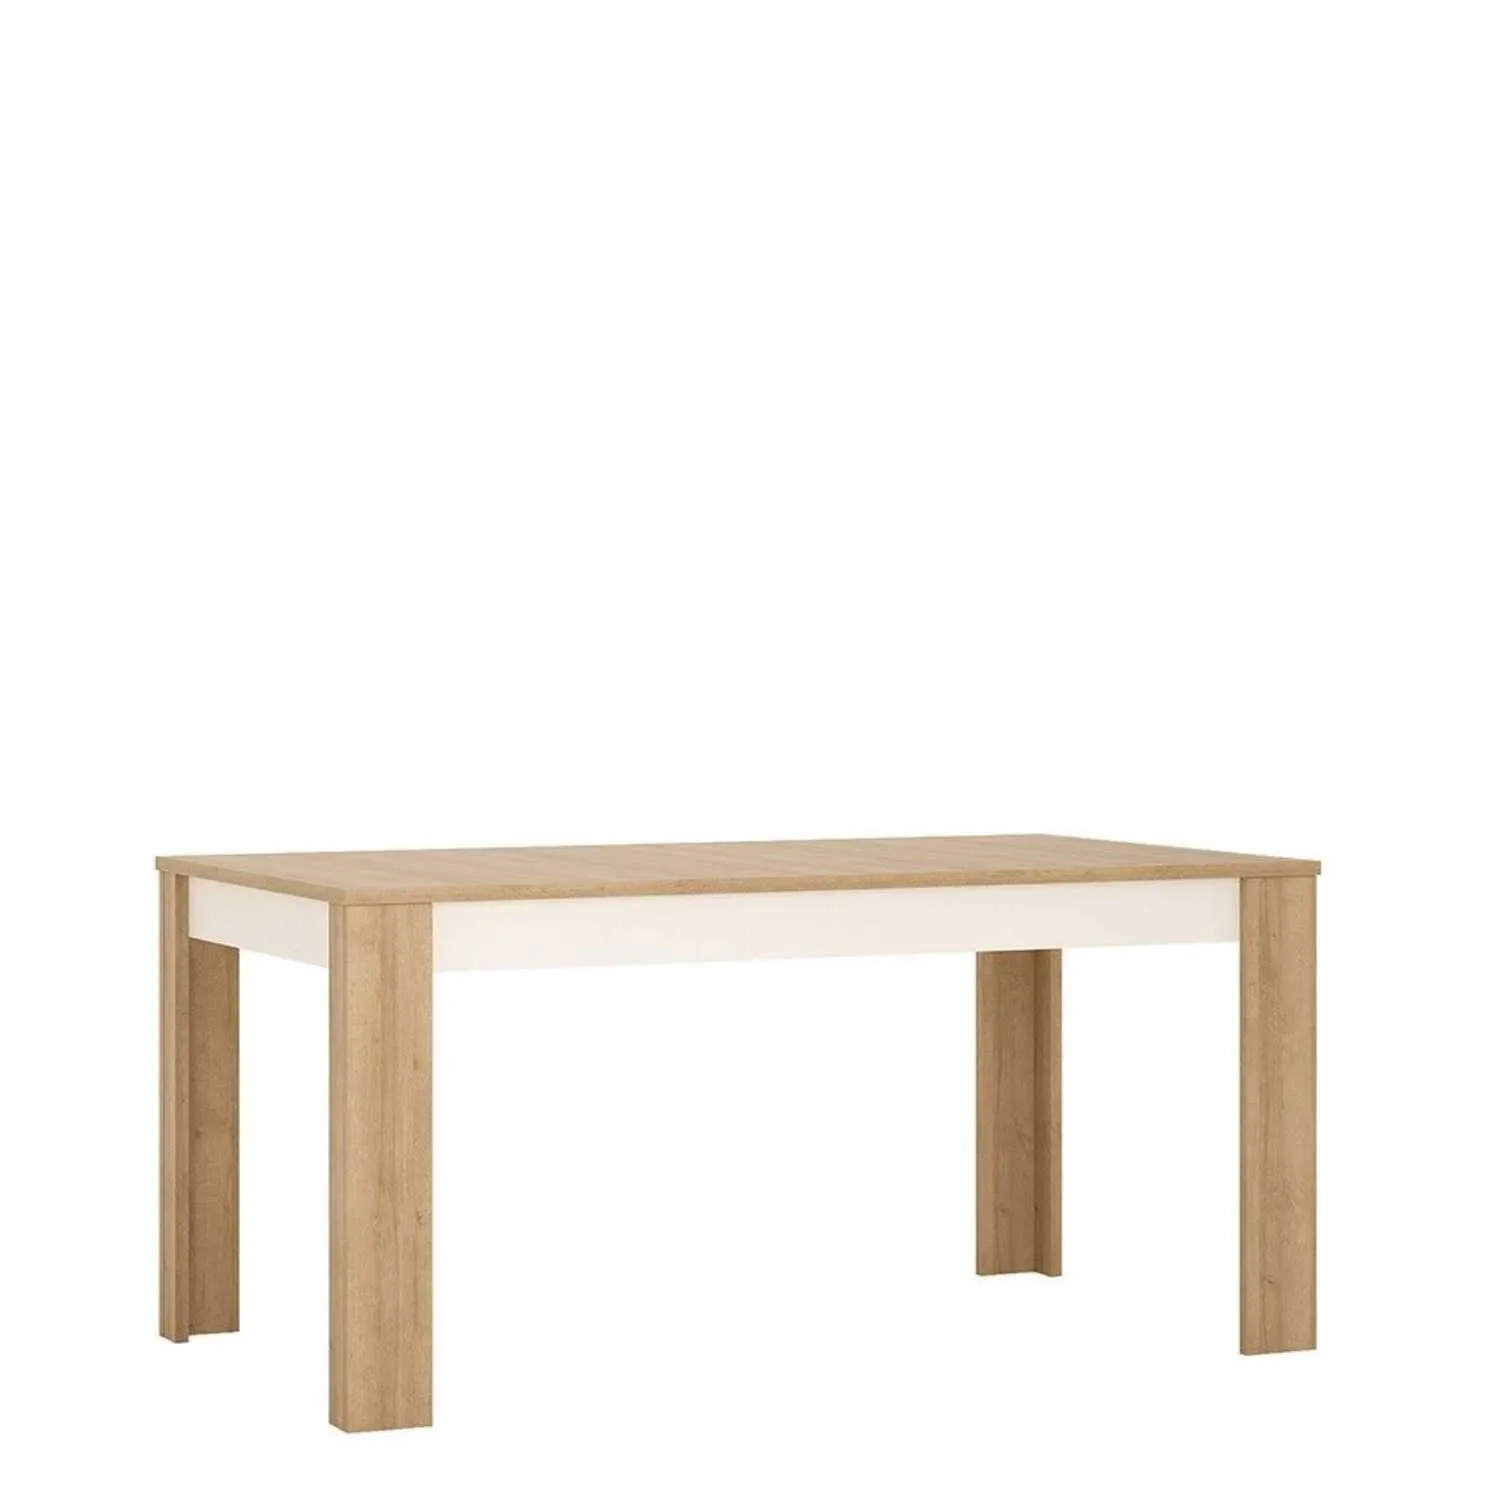 Large Extending Dining Table 160 to 200cm in Oak and White High Gloss 8 Seater